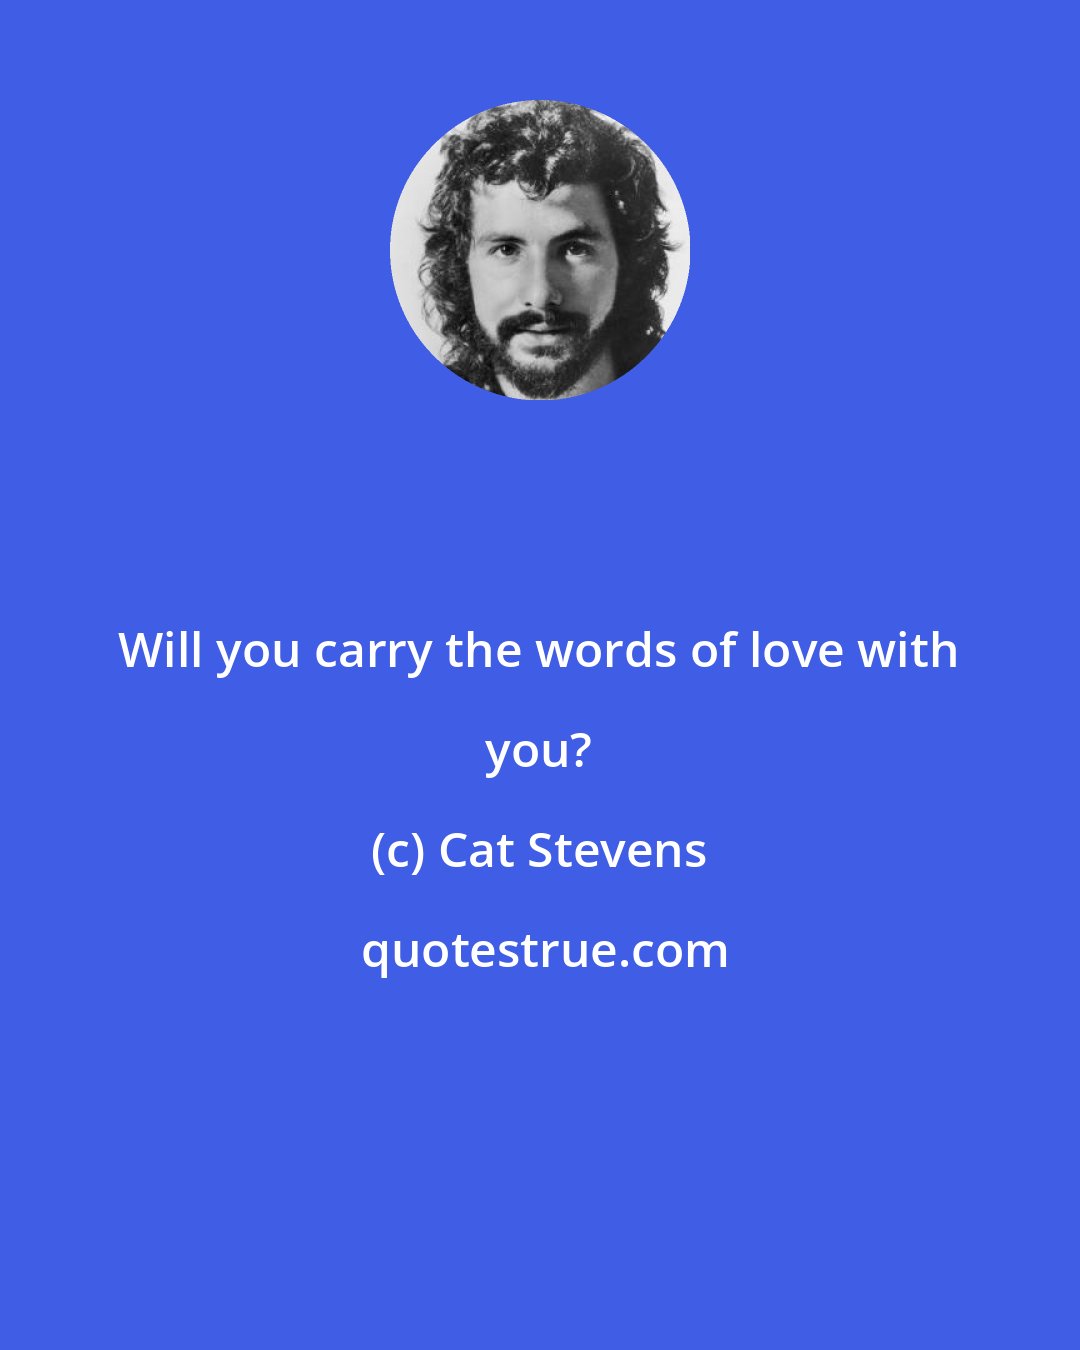 Cat Stevens: Will you carry the words of love with you?